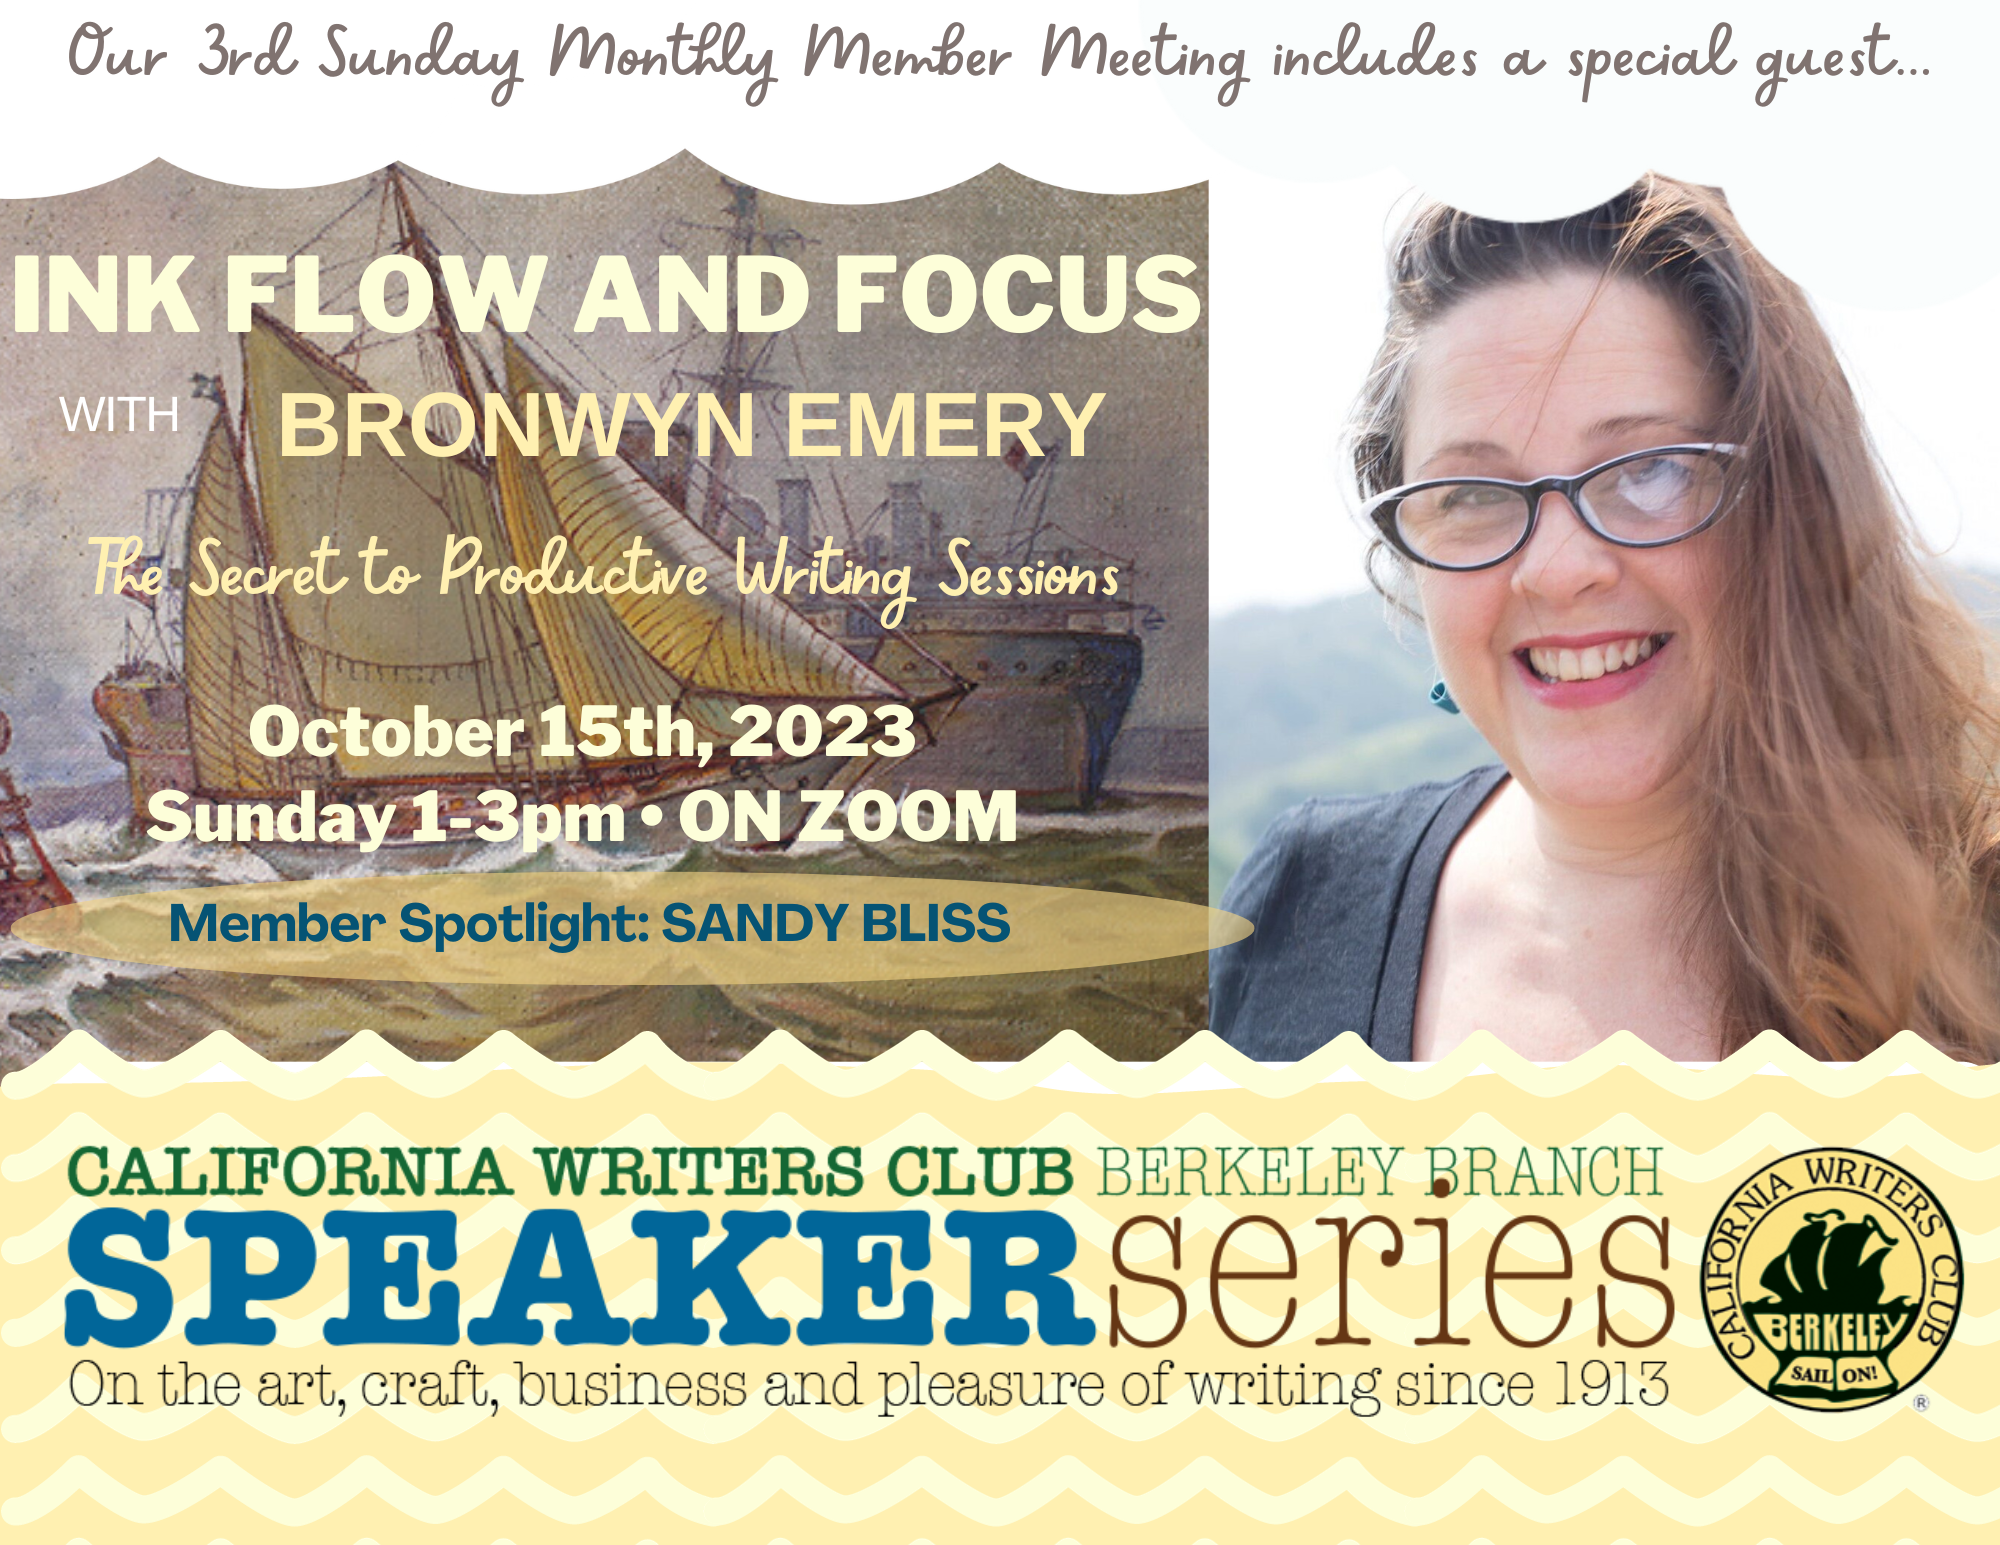 “Ink Flow and Focus” with Bronwyn Emery on October 15th, 2023